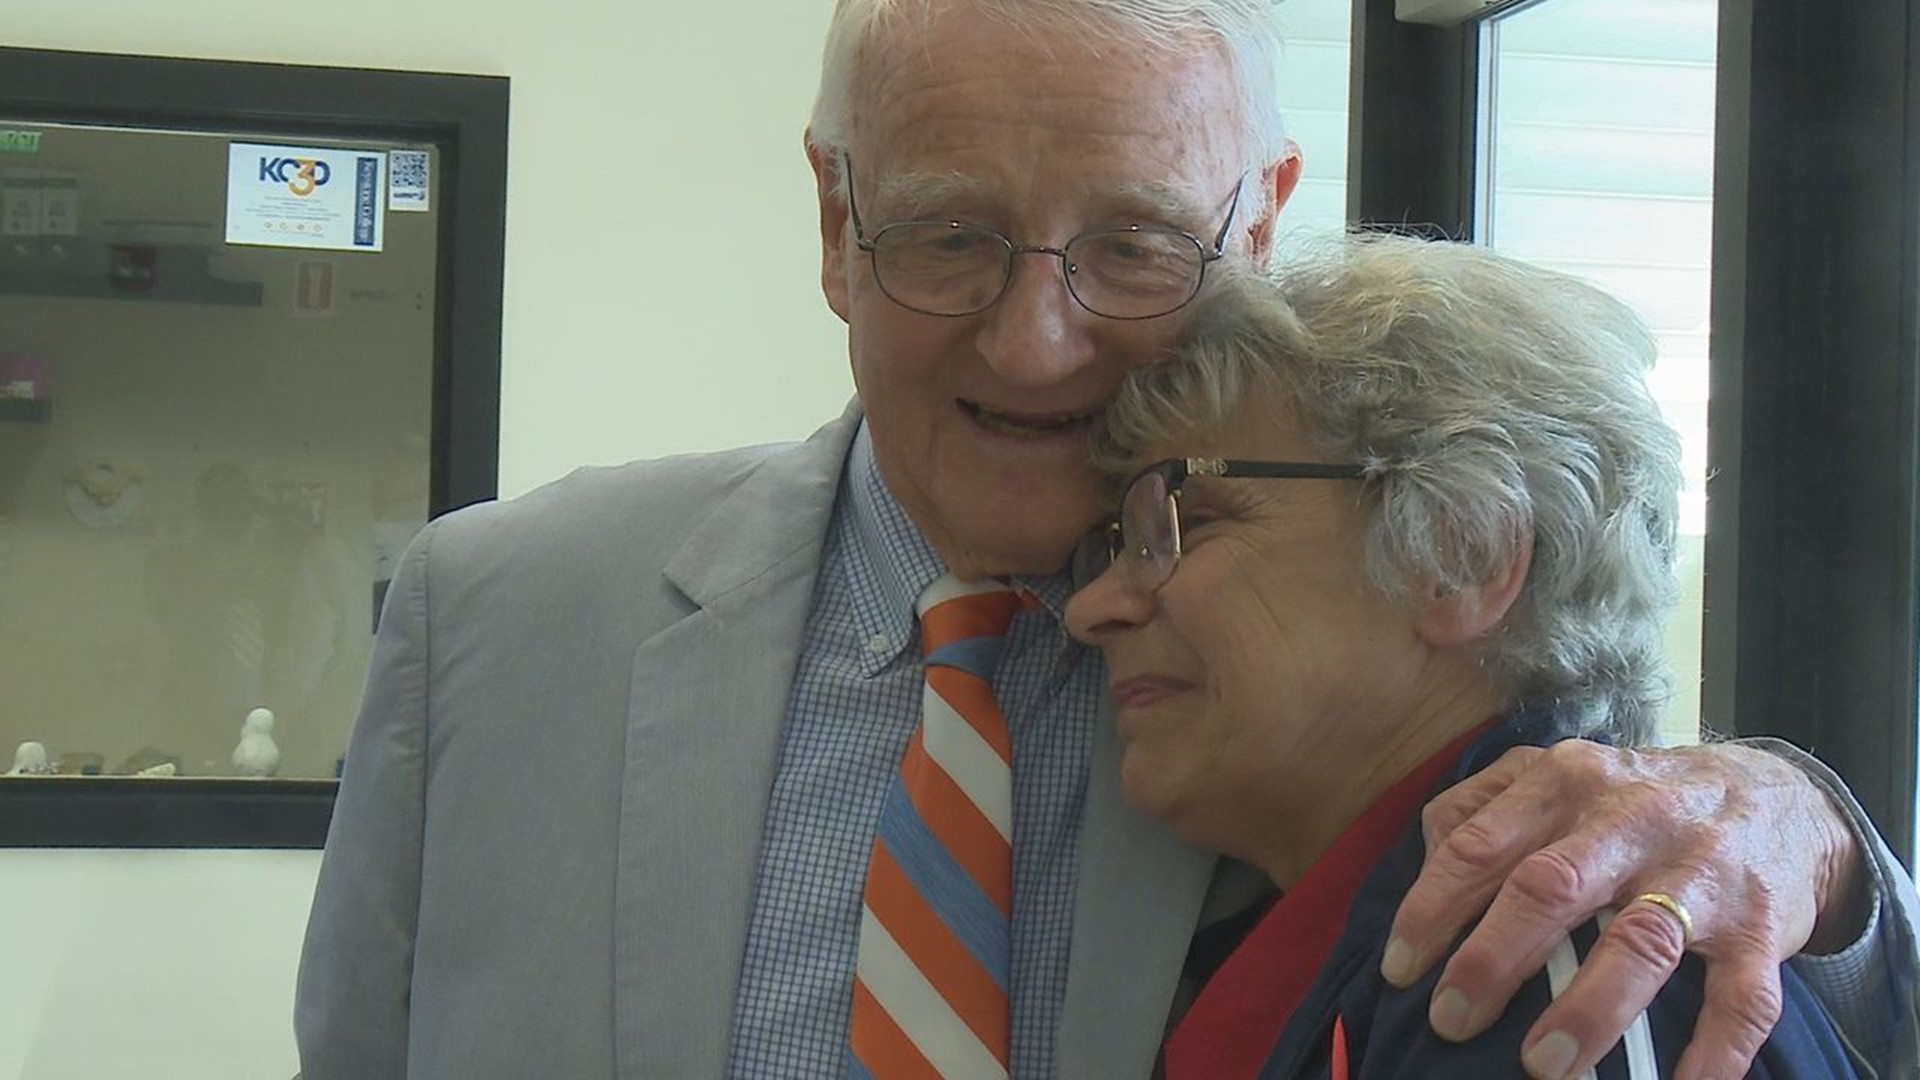 Giants Celebrate Career of Dr. Michael Mould, Who Spent Over 50 Years at Keystone